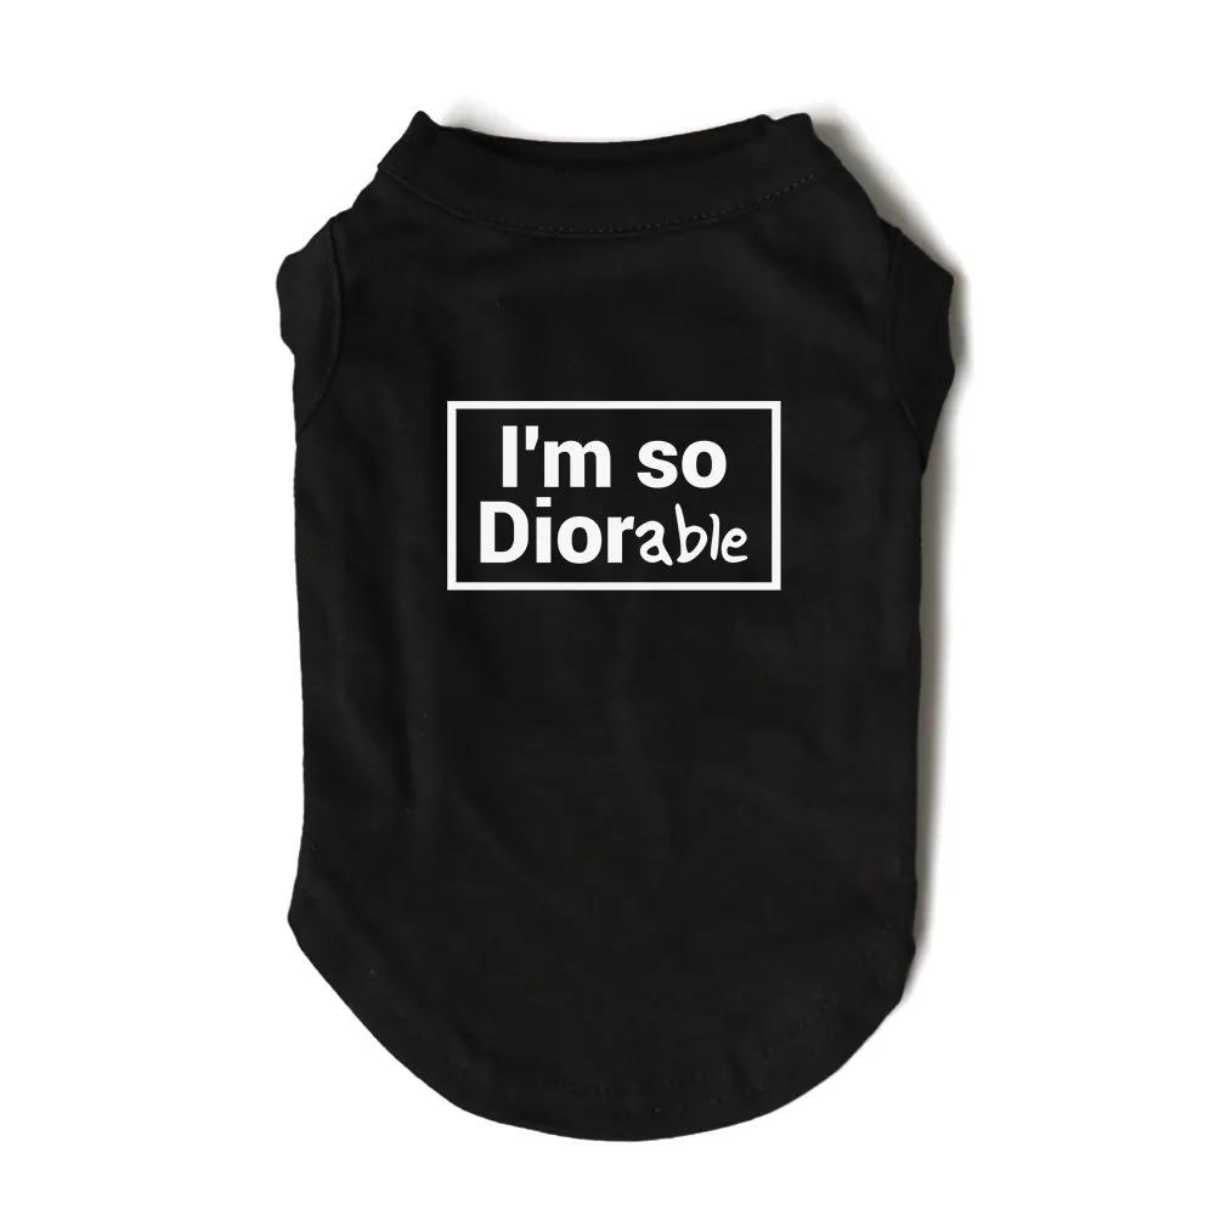 Black Dog Diorable Tshirts, singlet, dog clothing in black with white text.